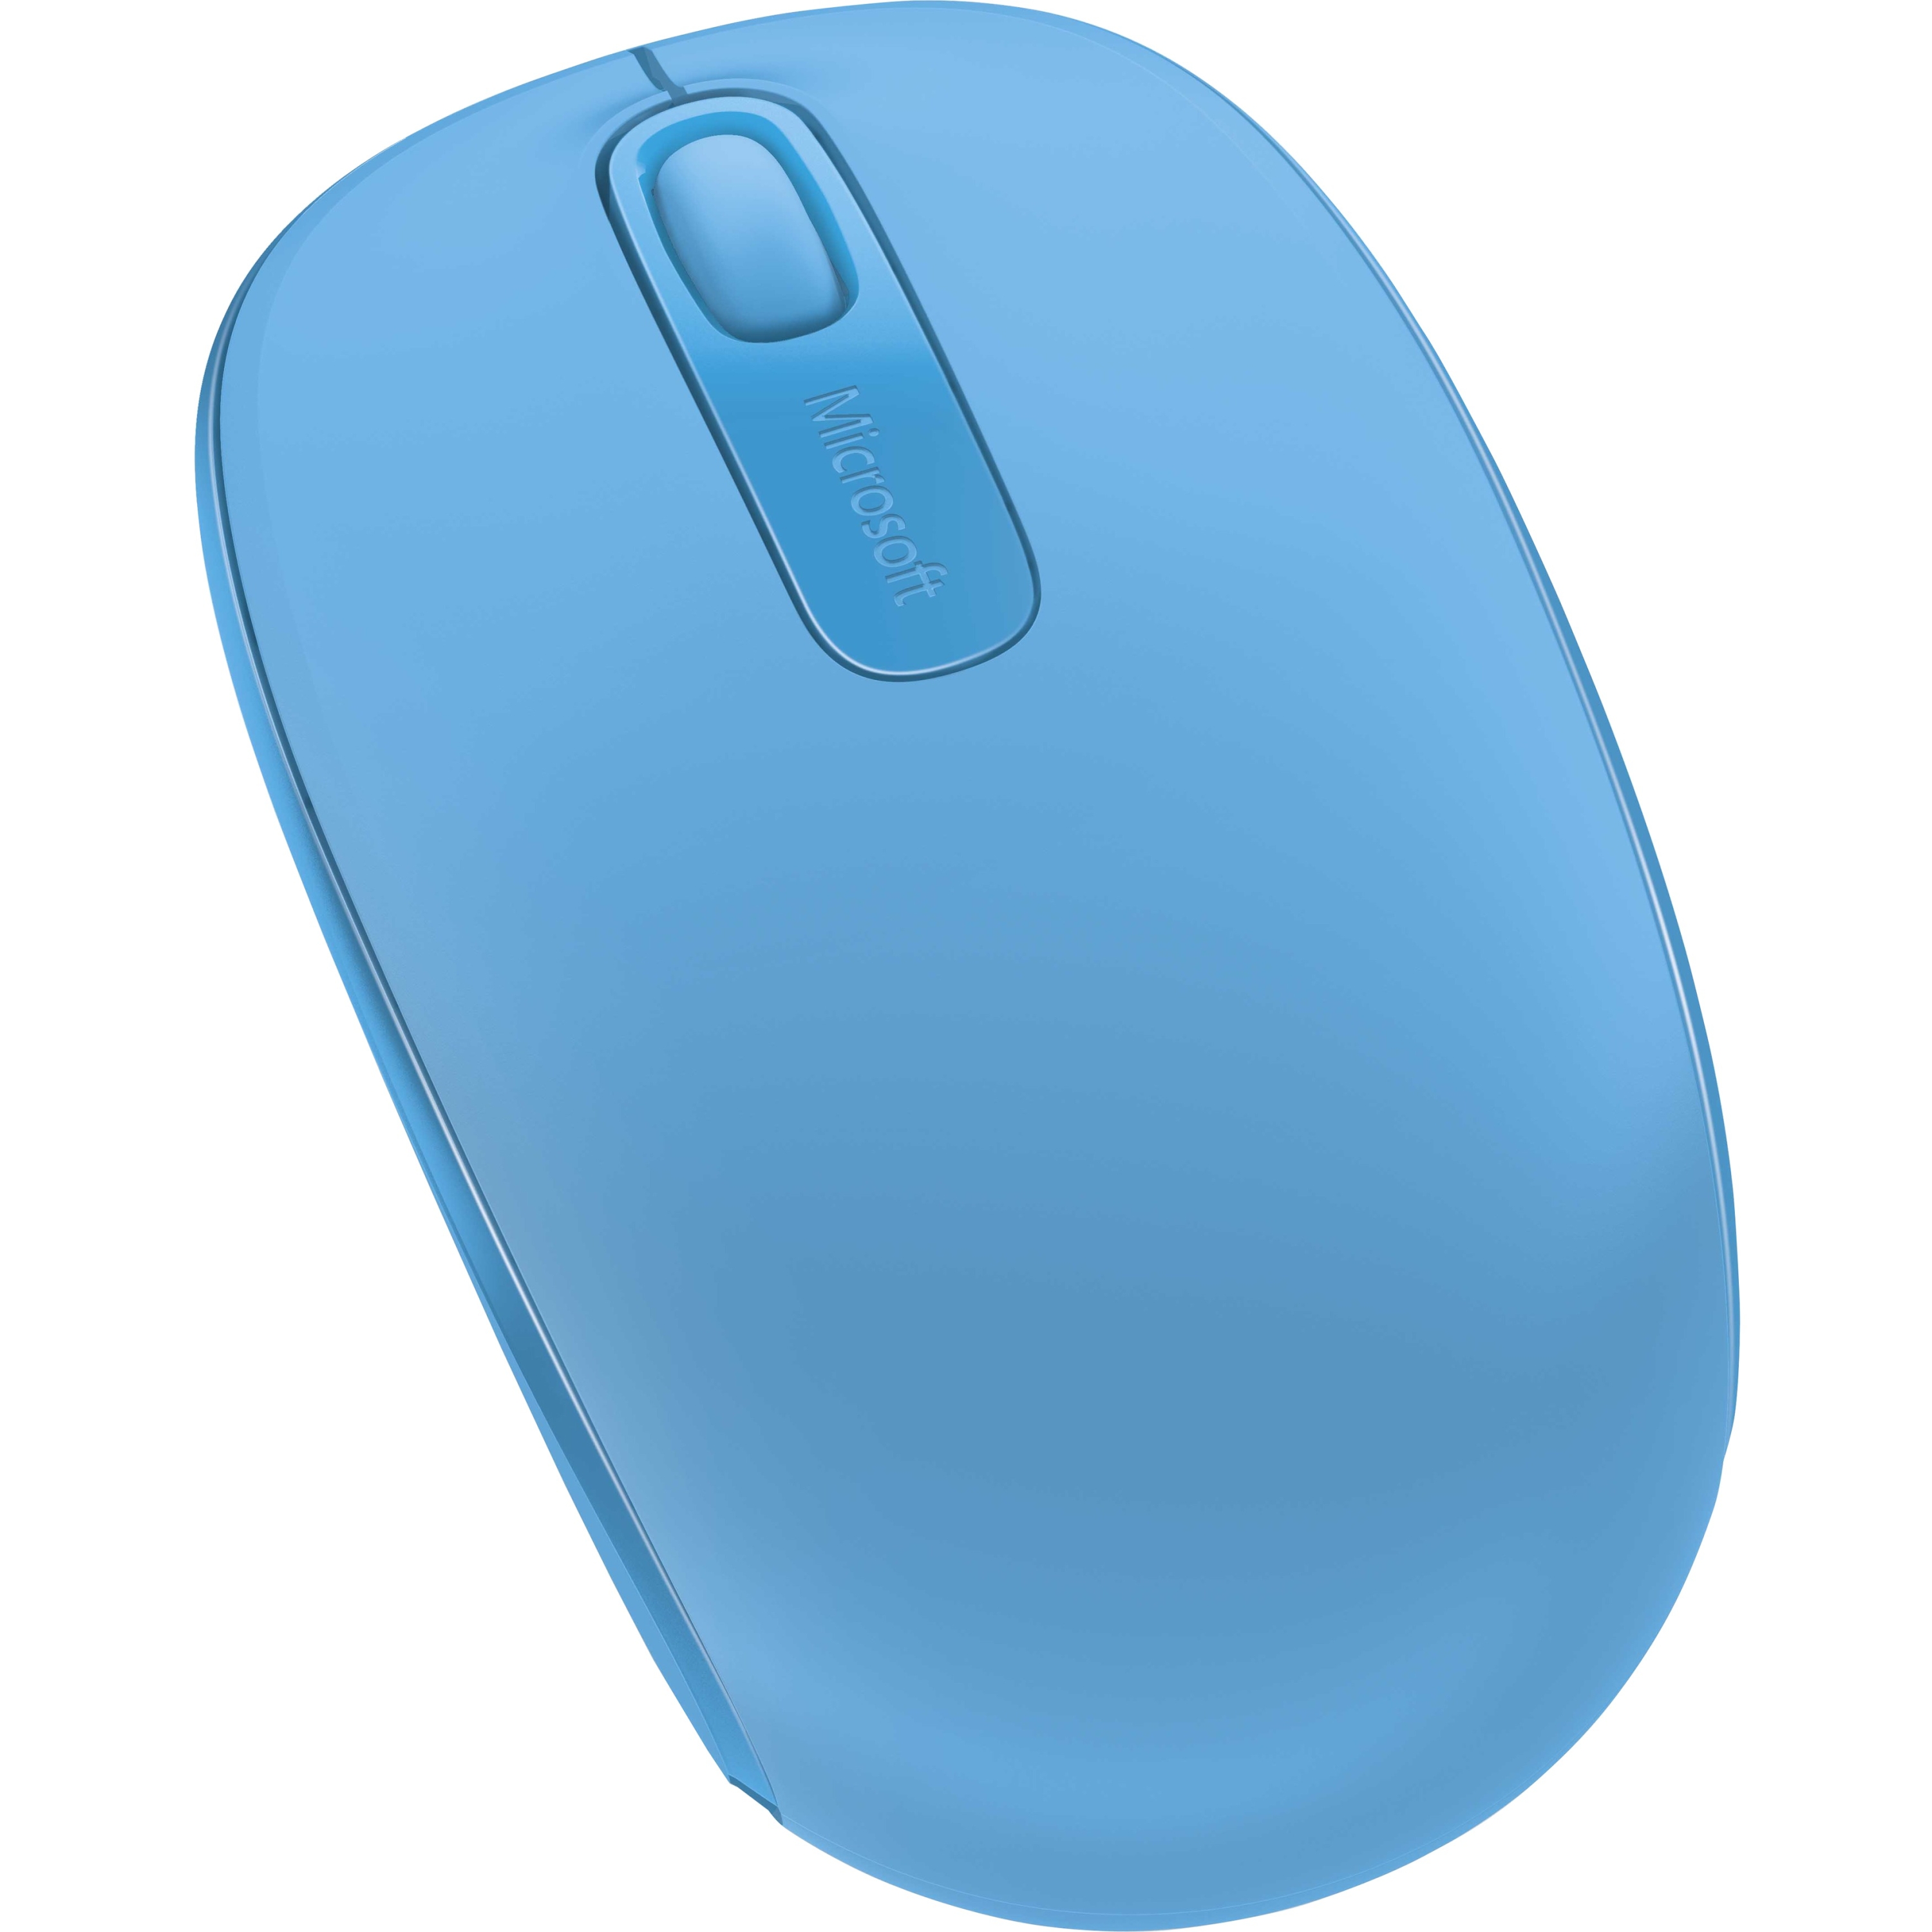 Microsoft Wireless Mobile Mouse 1850 - mouse - 2.4 GHz - cyan blue - image 4 of 4